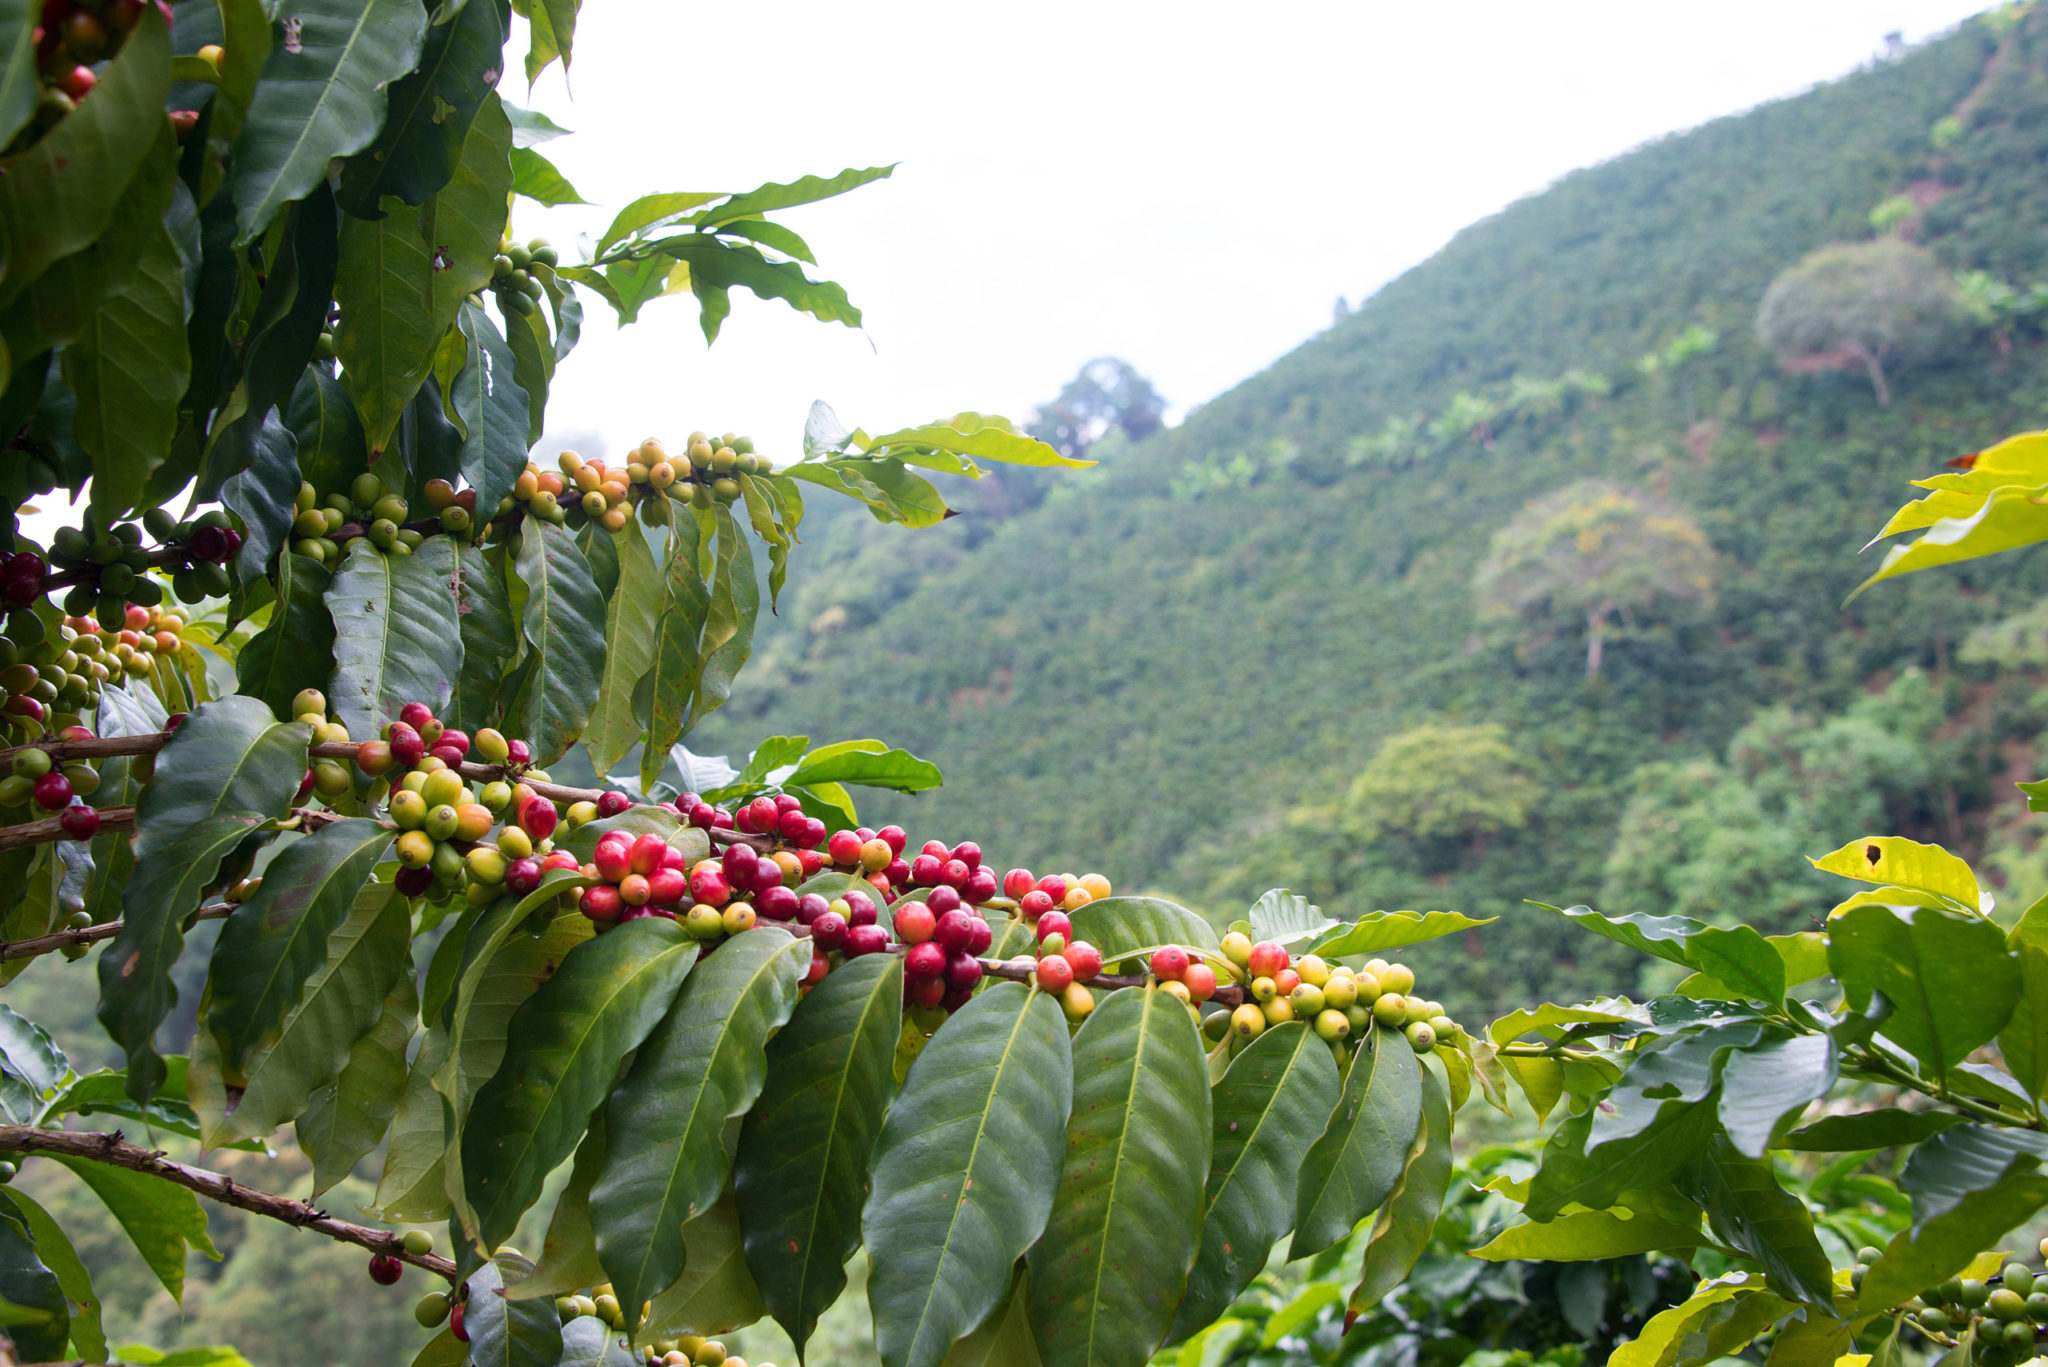 Red coffee cherries and coffee plant